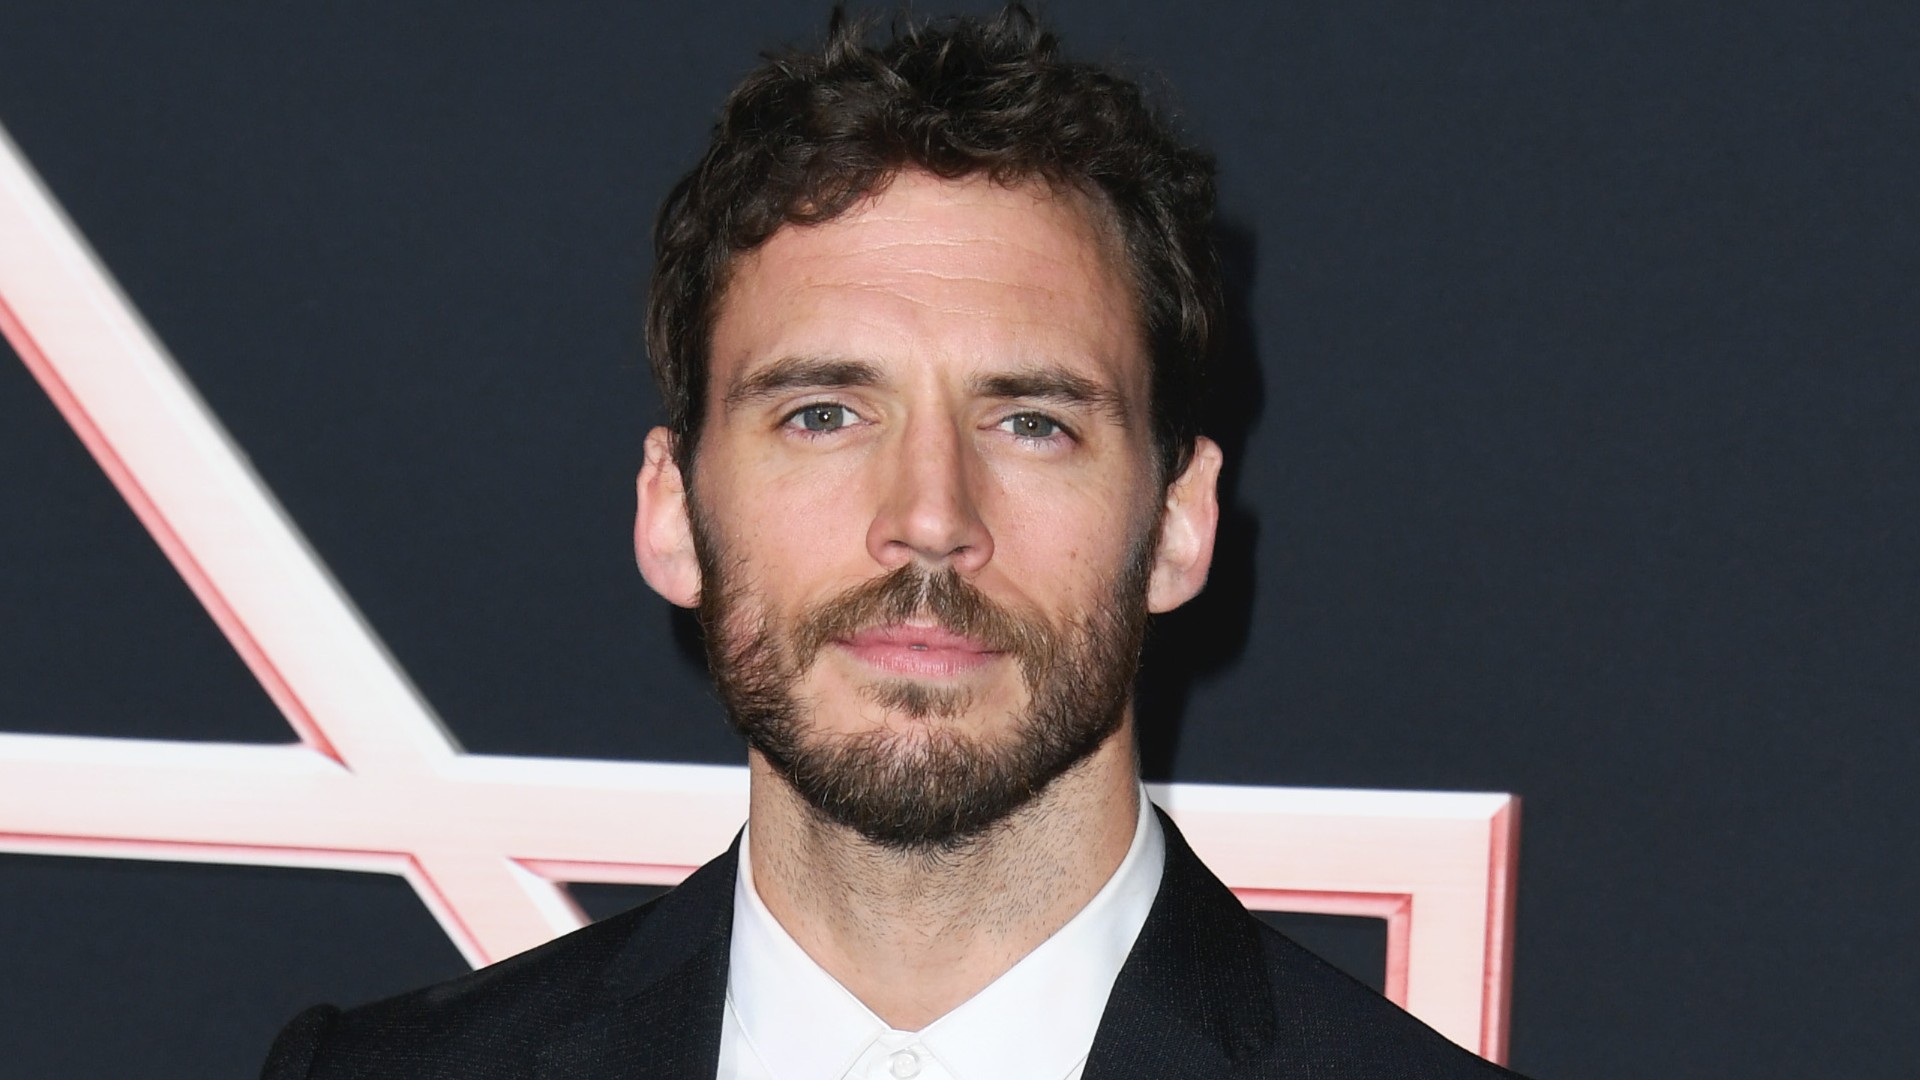 10 Things You May Not Know About Sam Claflin